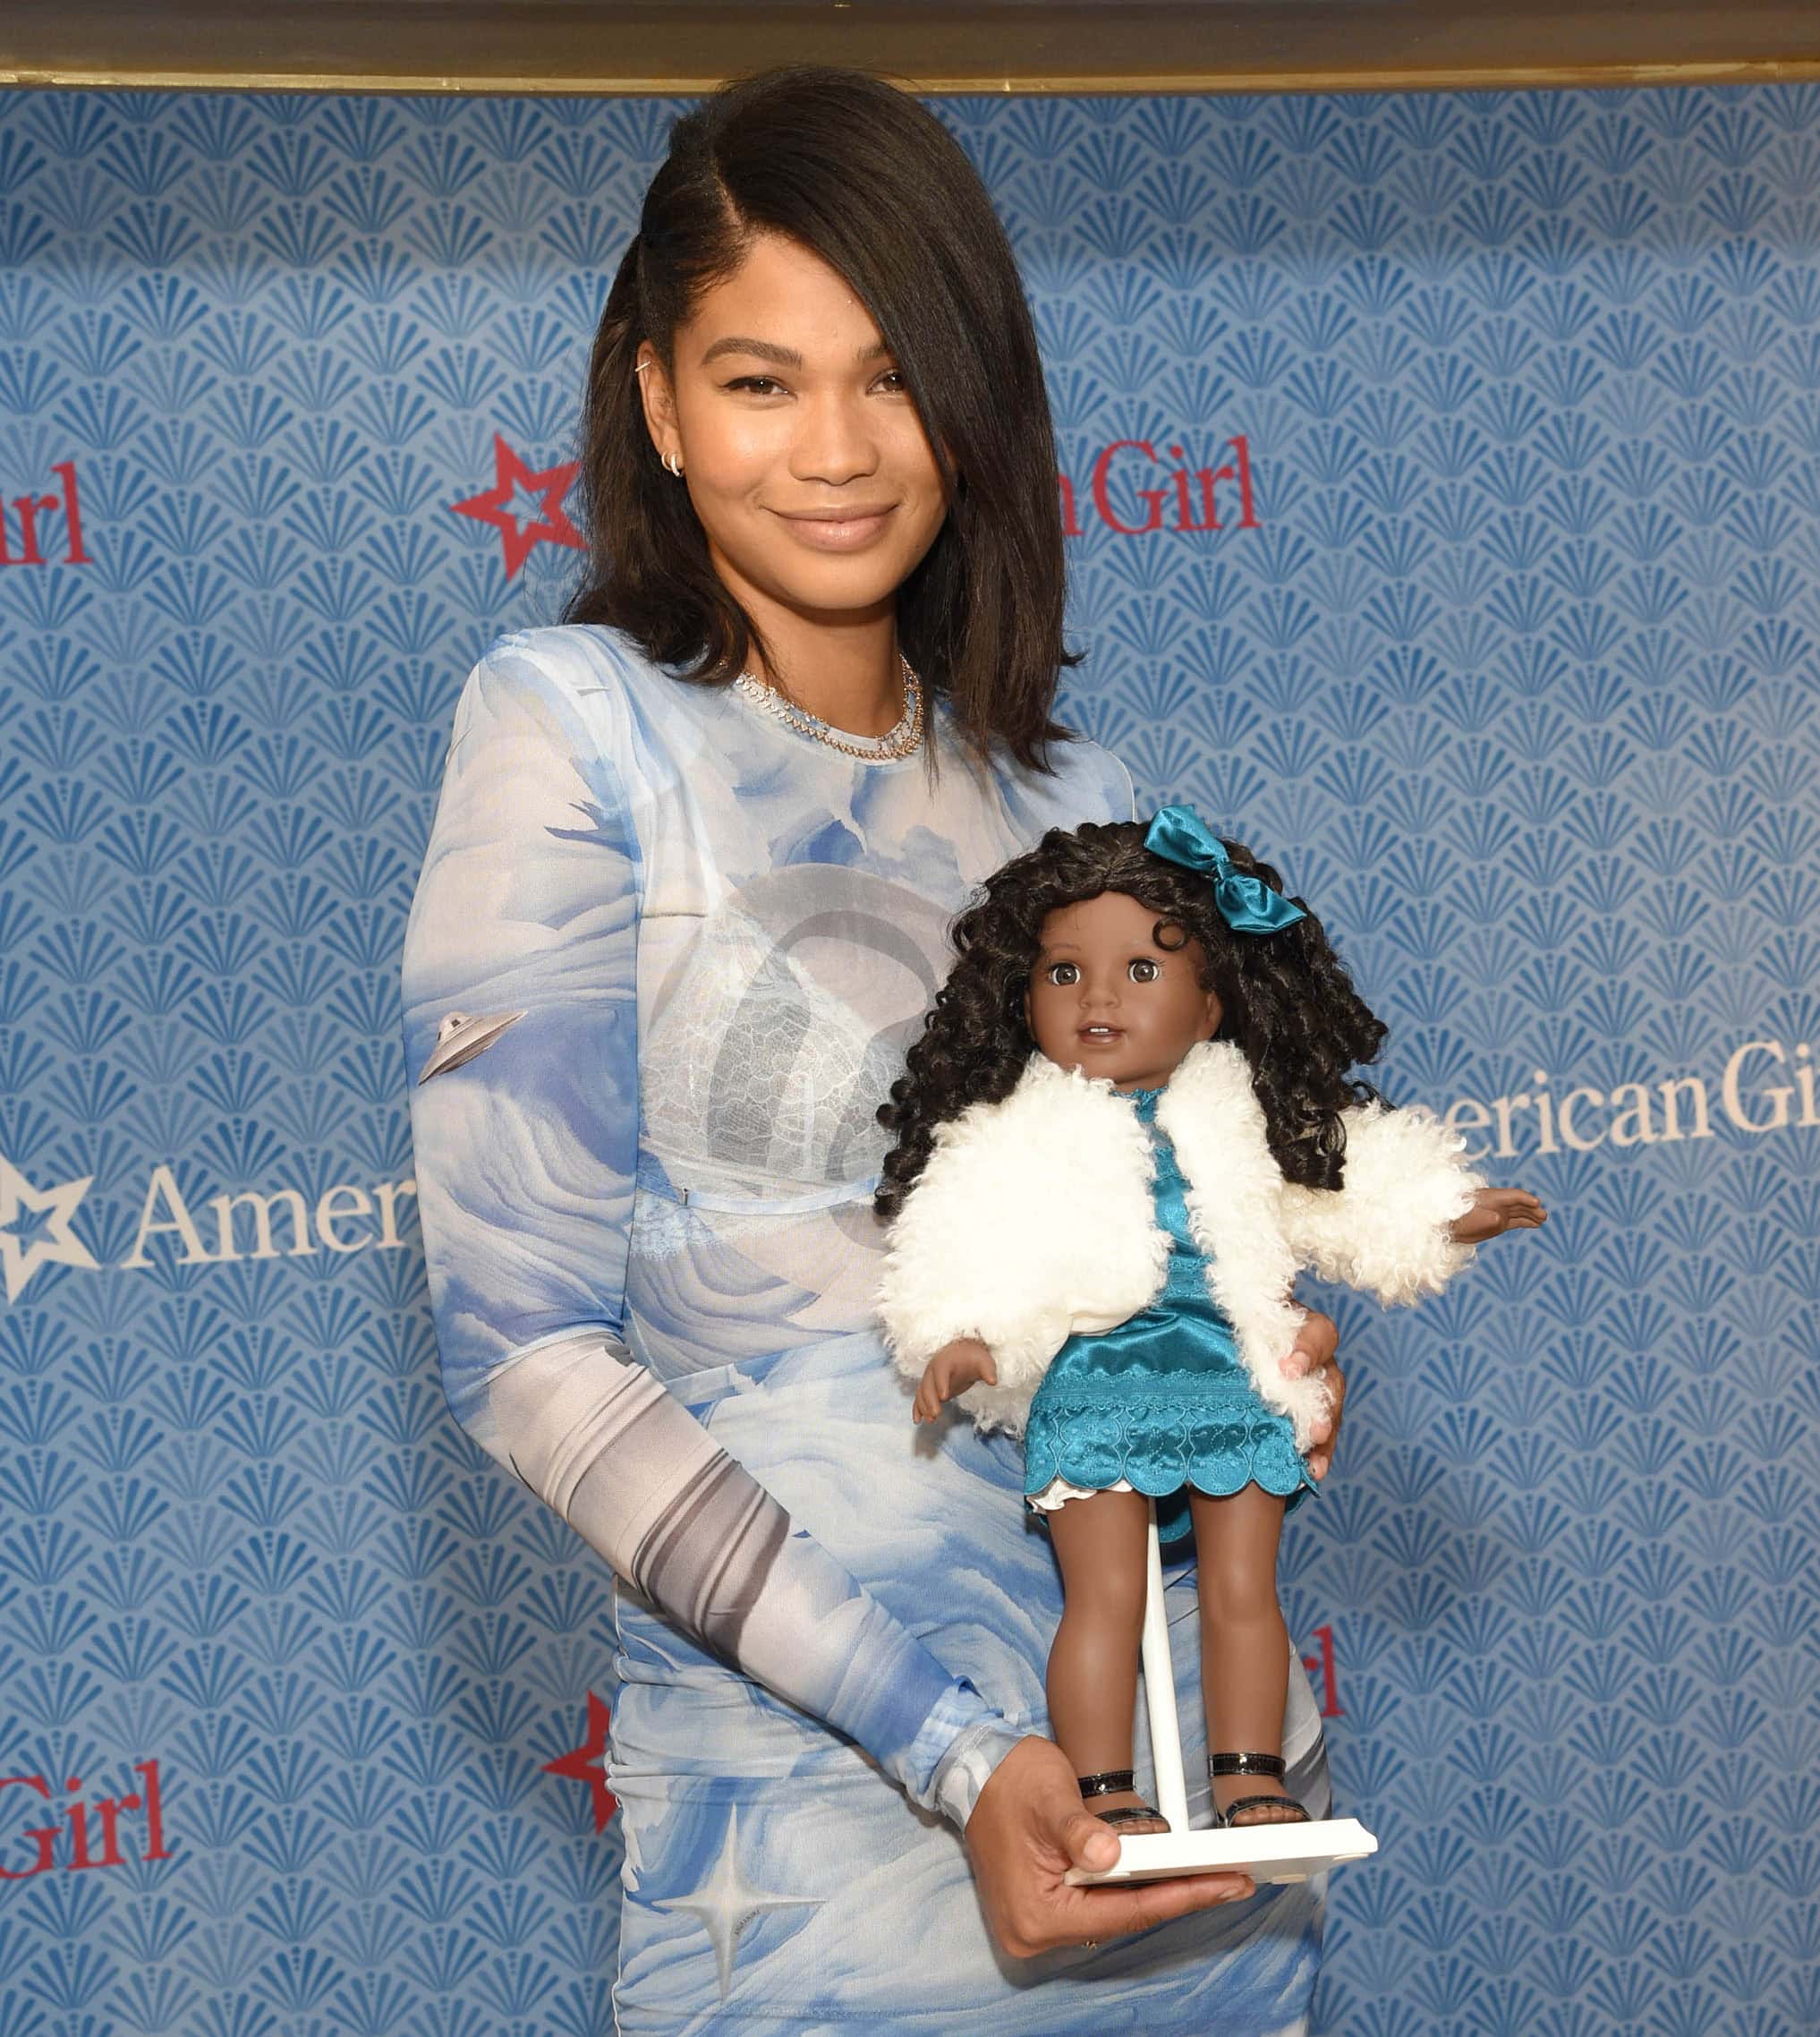 Chanel Iman wears neutral makeup and a deep side part as she carries American Girl's new character Claudie Wells